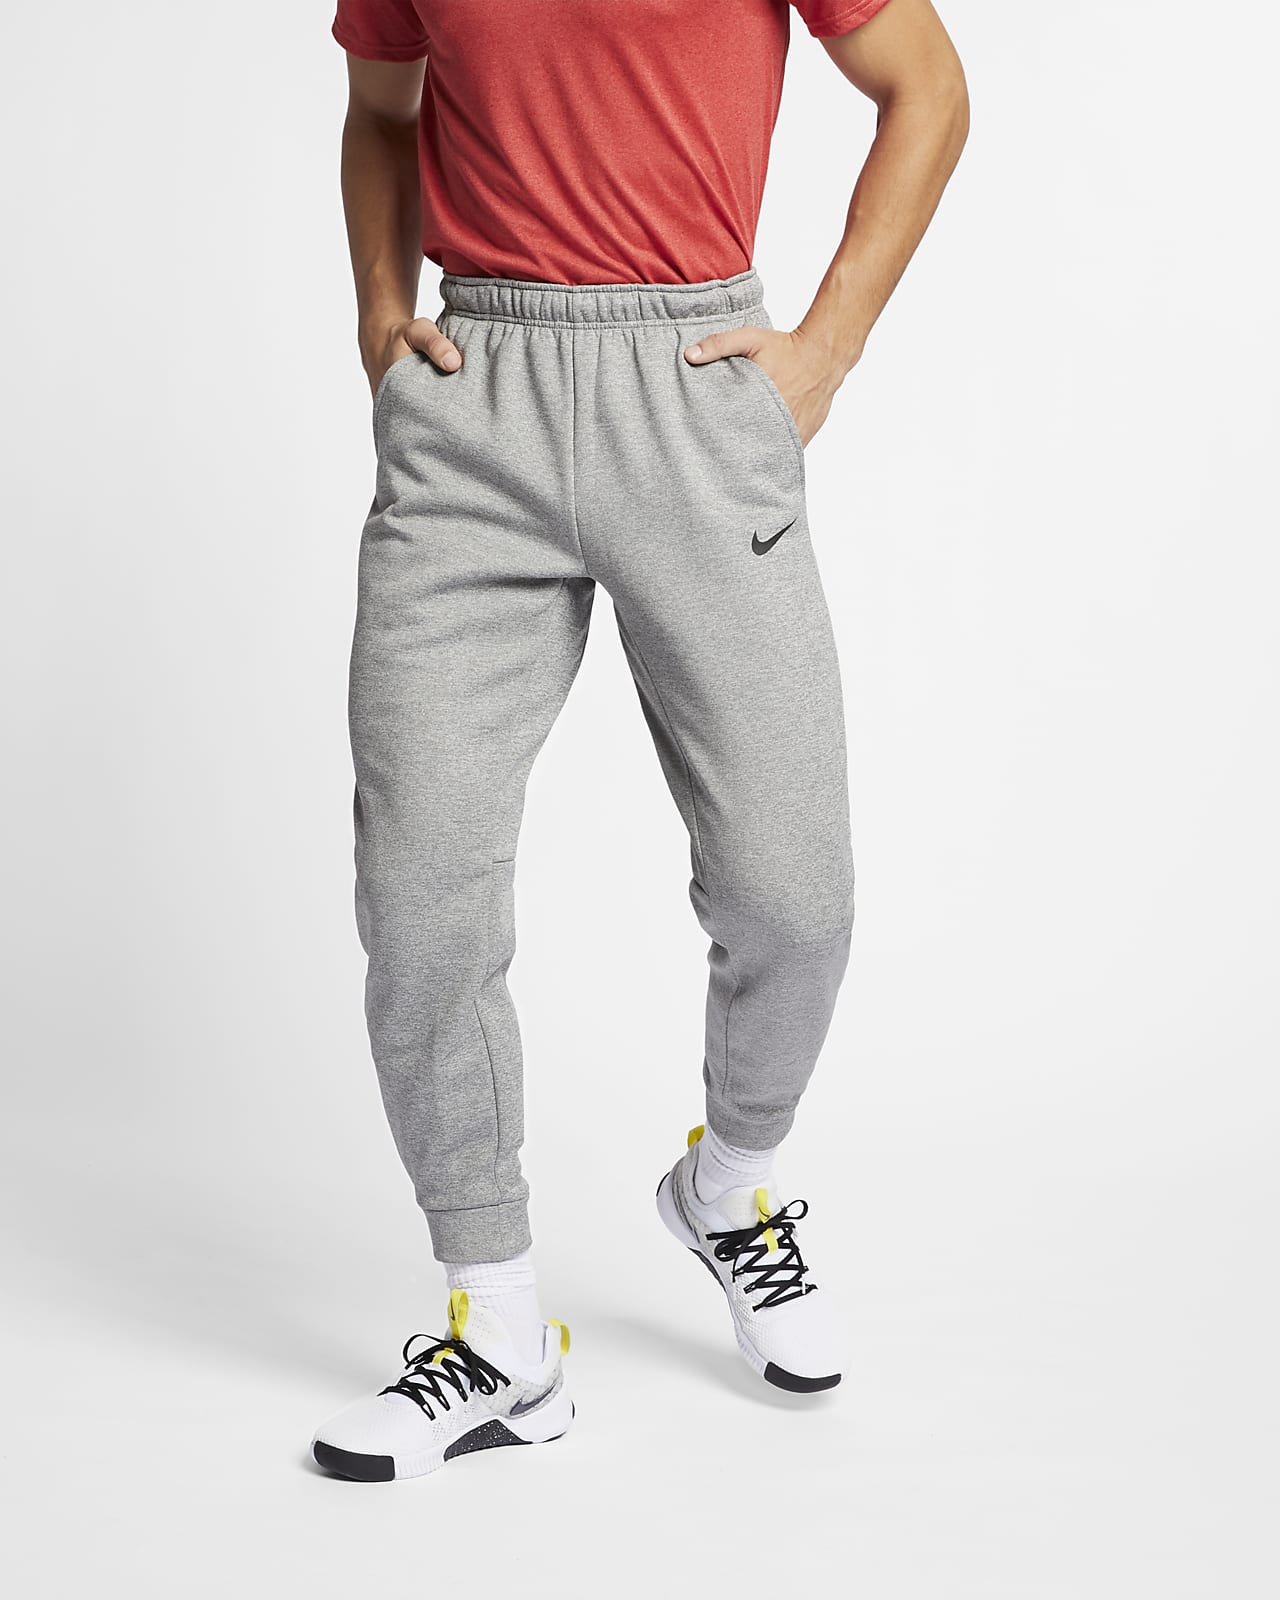 Nike Therma-FIT Men's Tapered Training Trousers